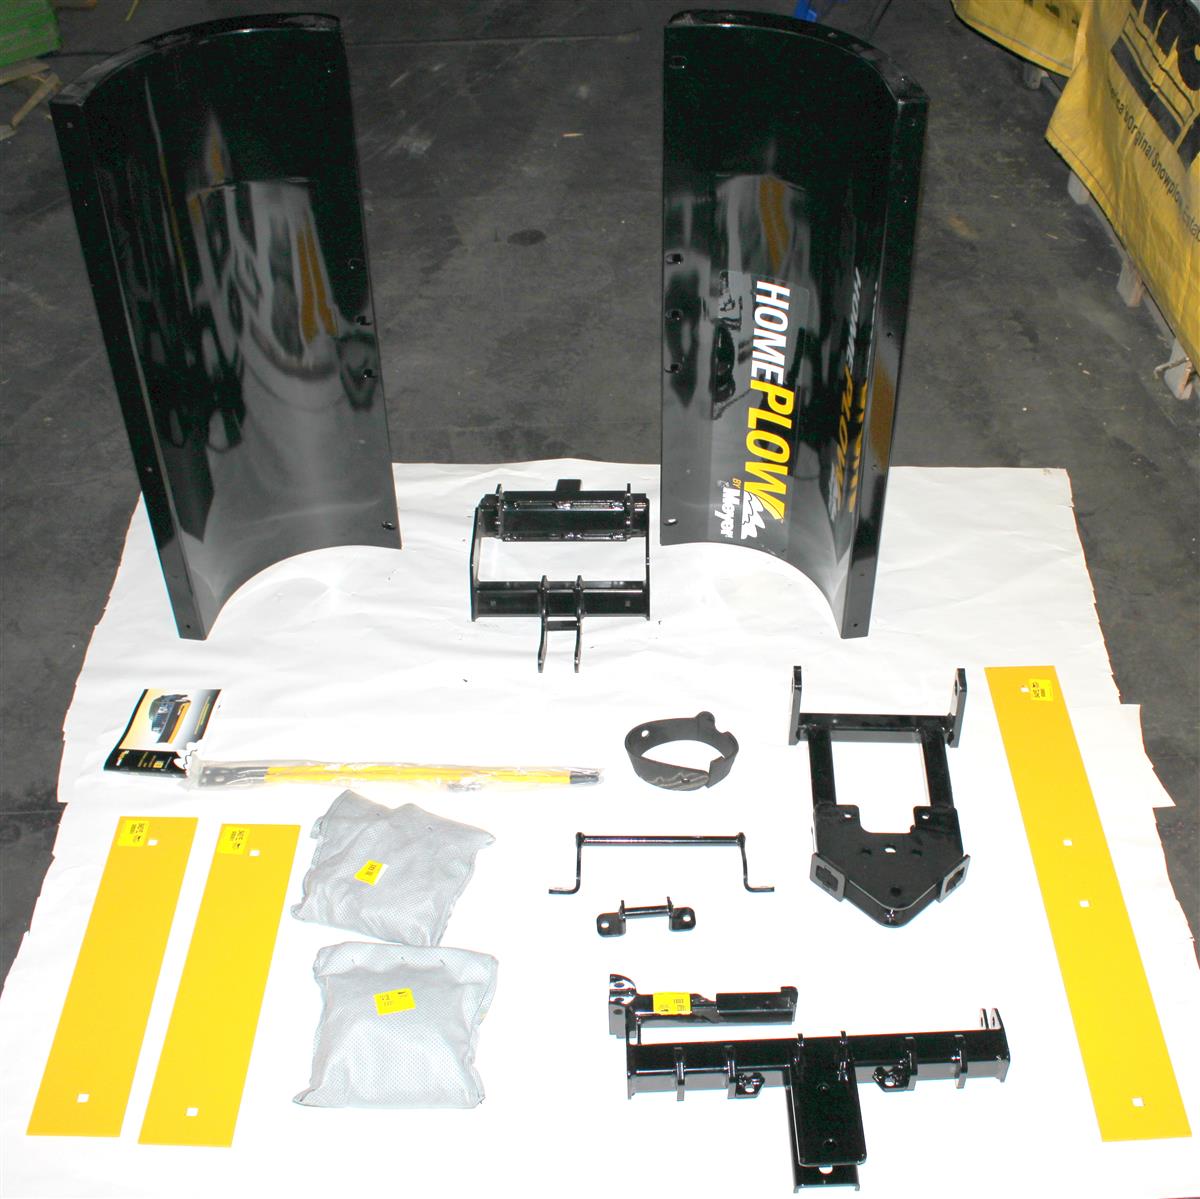 SNOW-068 | SNOW-068 Meyer Home Plow HP 6.8 2PC Manual Lift Engine Package Kit with Blades Meyer Sn (10).JPG